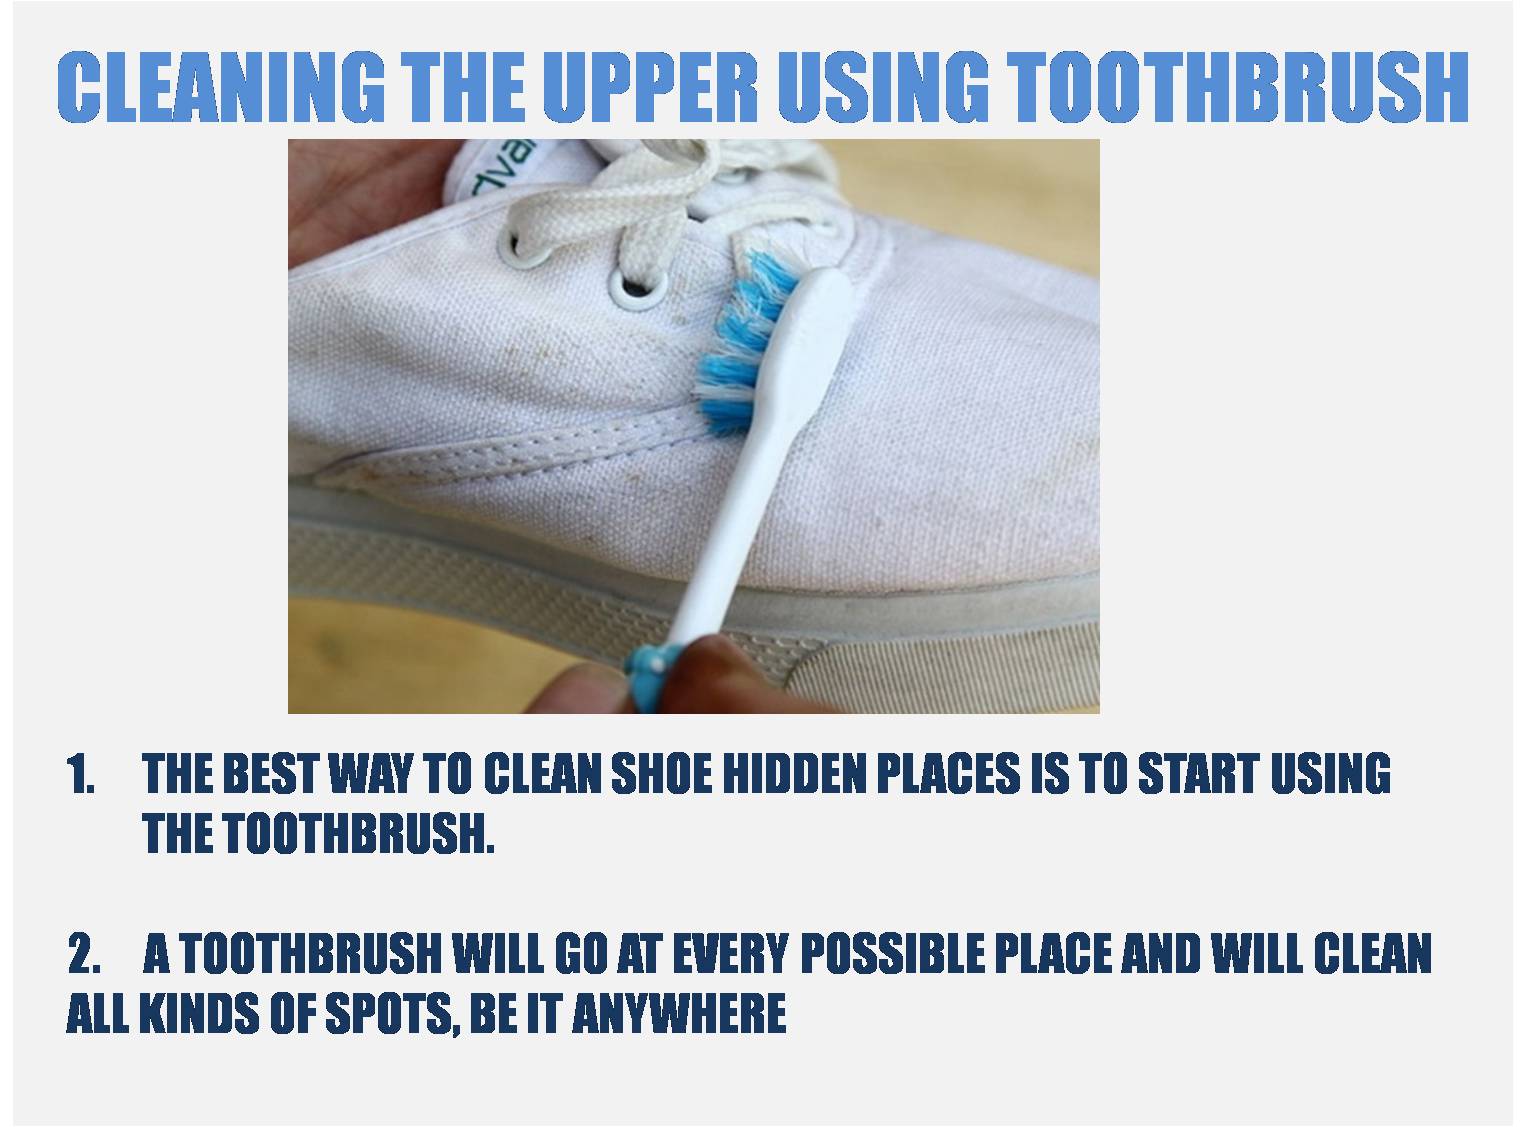 Badminton_Shoe_Cleaning_Technique_with_Toothbrush_khelmart_Guide.jpg